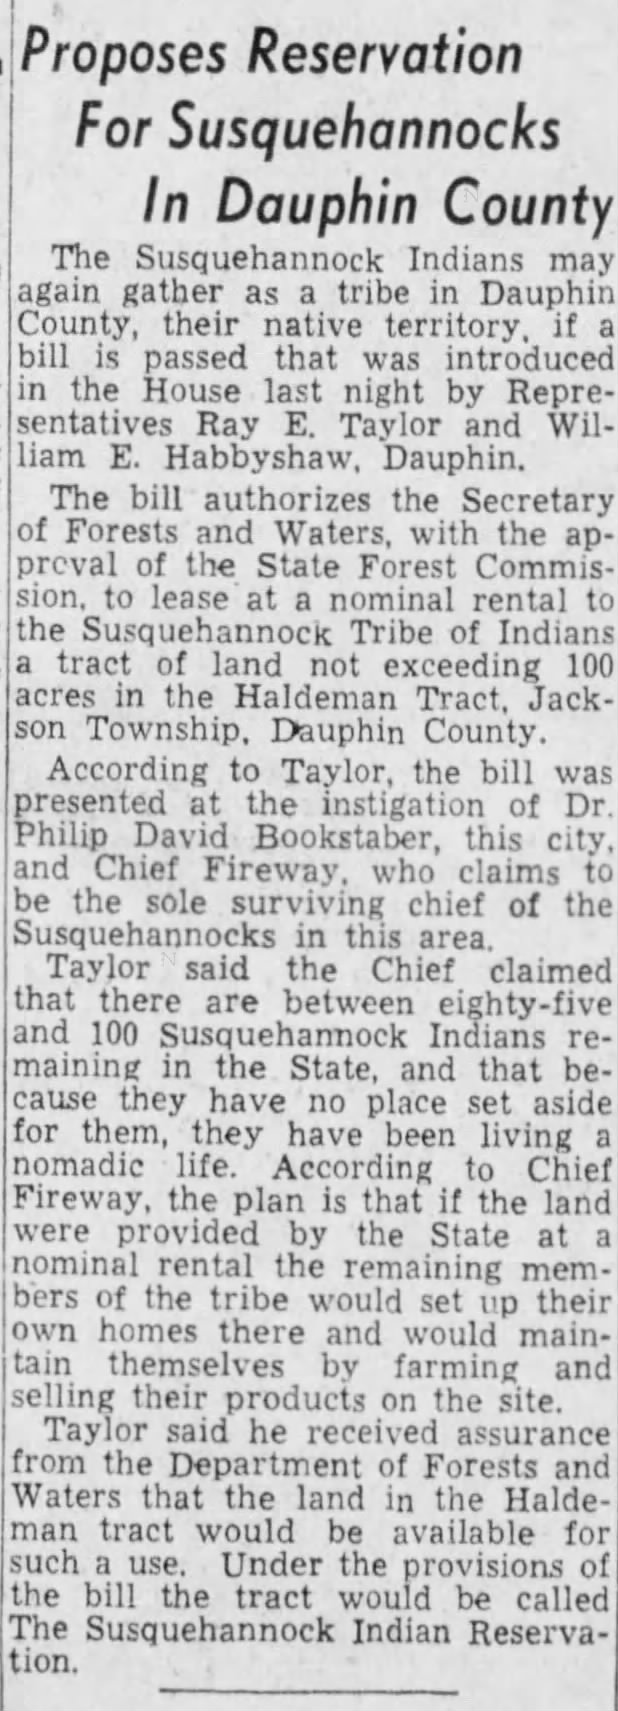 The Evening News (Harrisburg, Pa), 6 May 1941, Tue, Pg.13